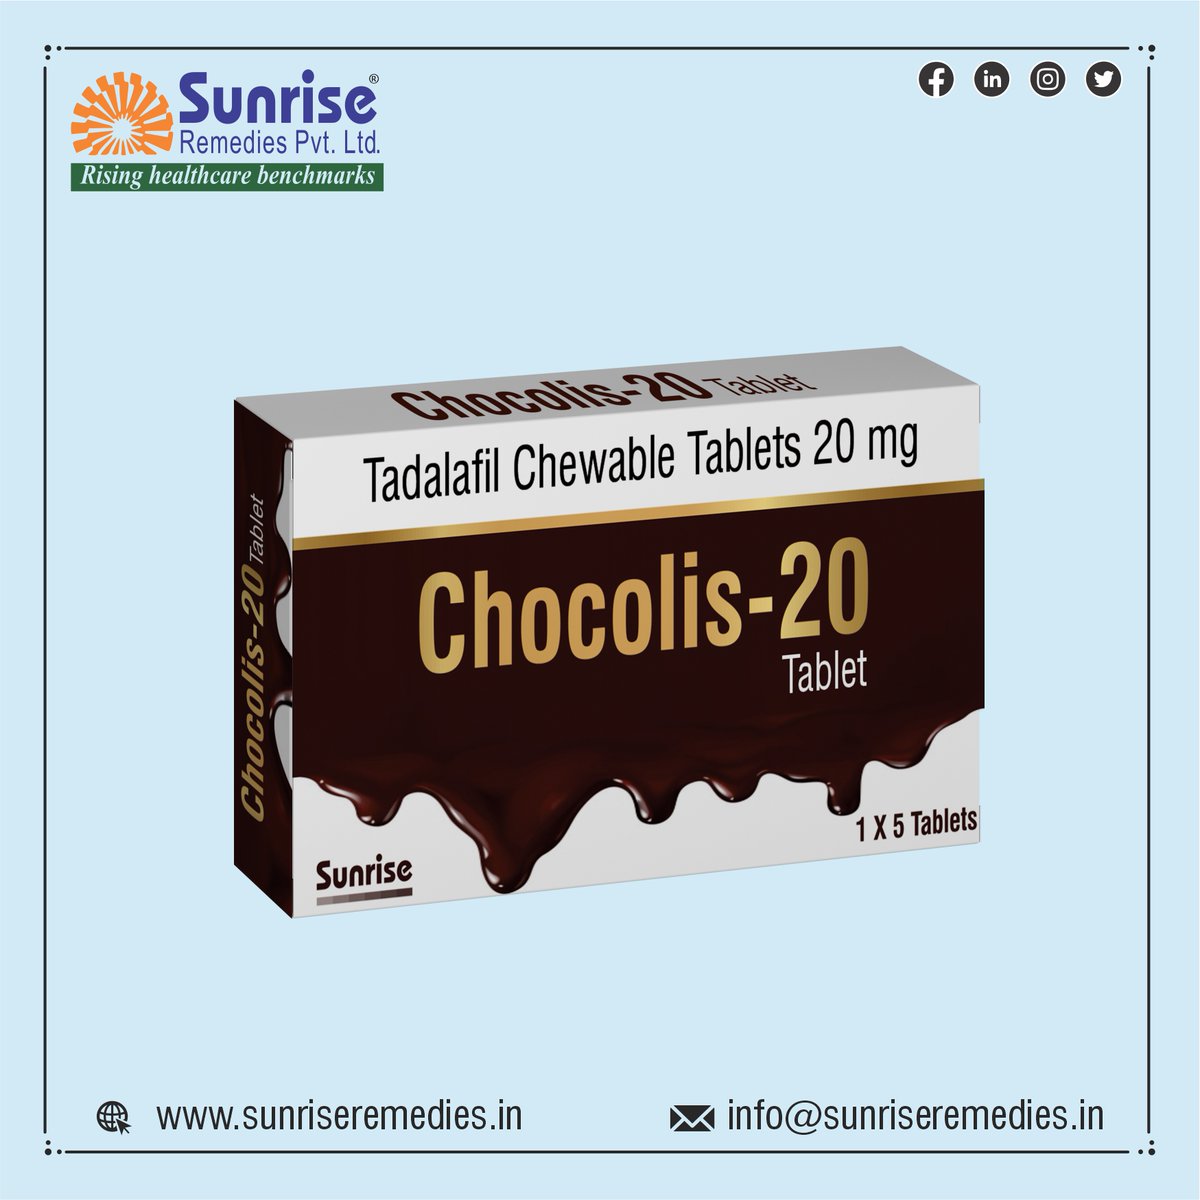 Increase Your Night Life with #ChocolisChewable Contains Tadalafil Chewable Most Popular Products From Sunrise Remedies Pvt. Ltd.

Read More: sunriseremedies.in/our-products/c…

#Tadarise #TadalafilChewable #SildenafilChewable #Dapoxetine #Vardenafil #Avanafil #Udenafil #EDPills #PEPills